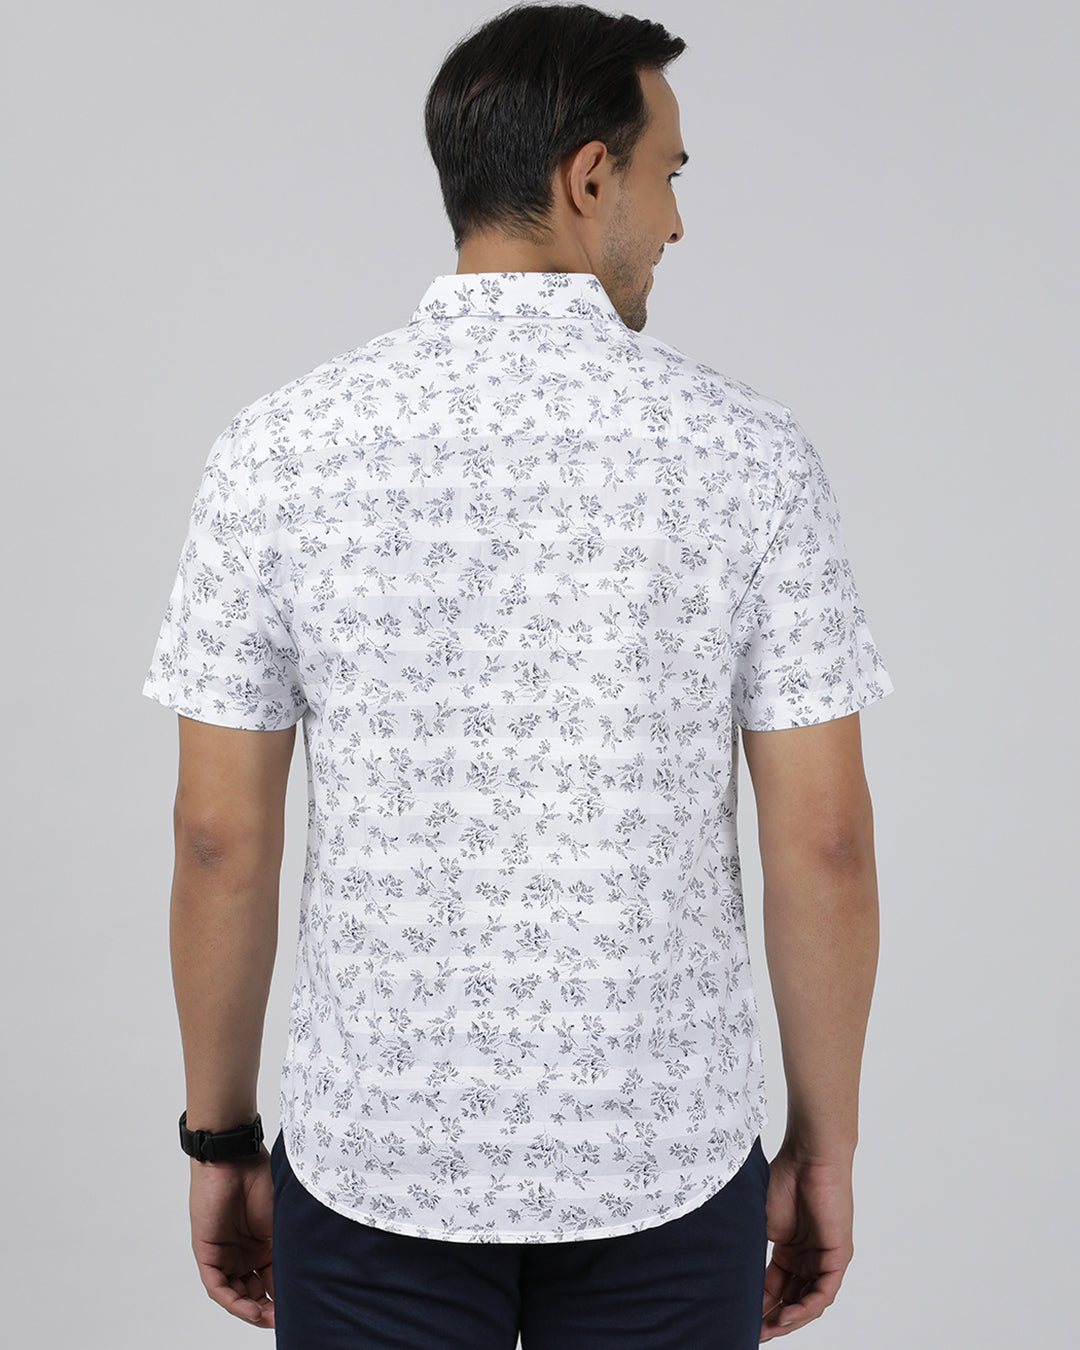 Casual White Half Sleeve Regular Fit Print Shirt with Collar for Men